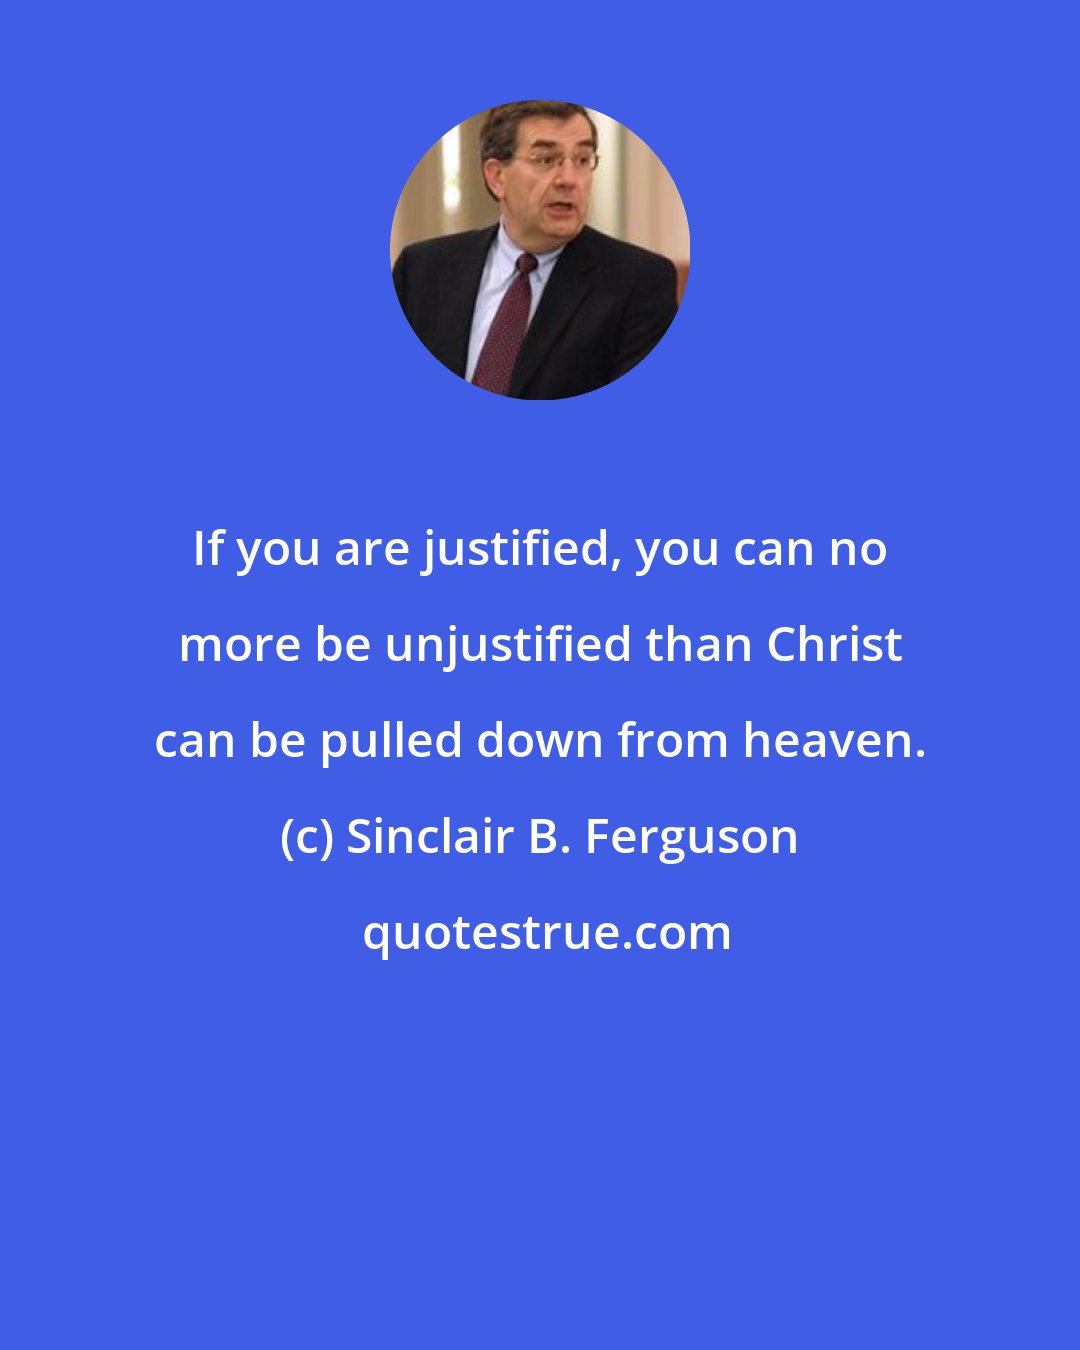 Sinclair B. Ferguson: If you are justified, you can no more be unjustified than Christ can be pulled down from heaven.